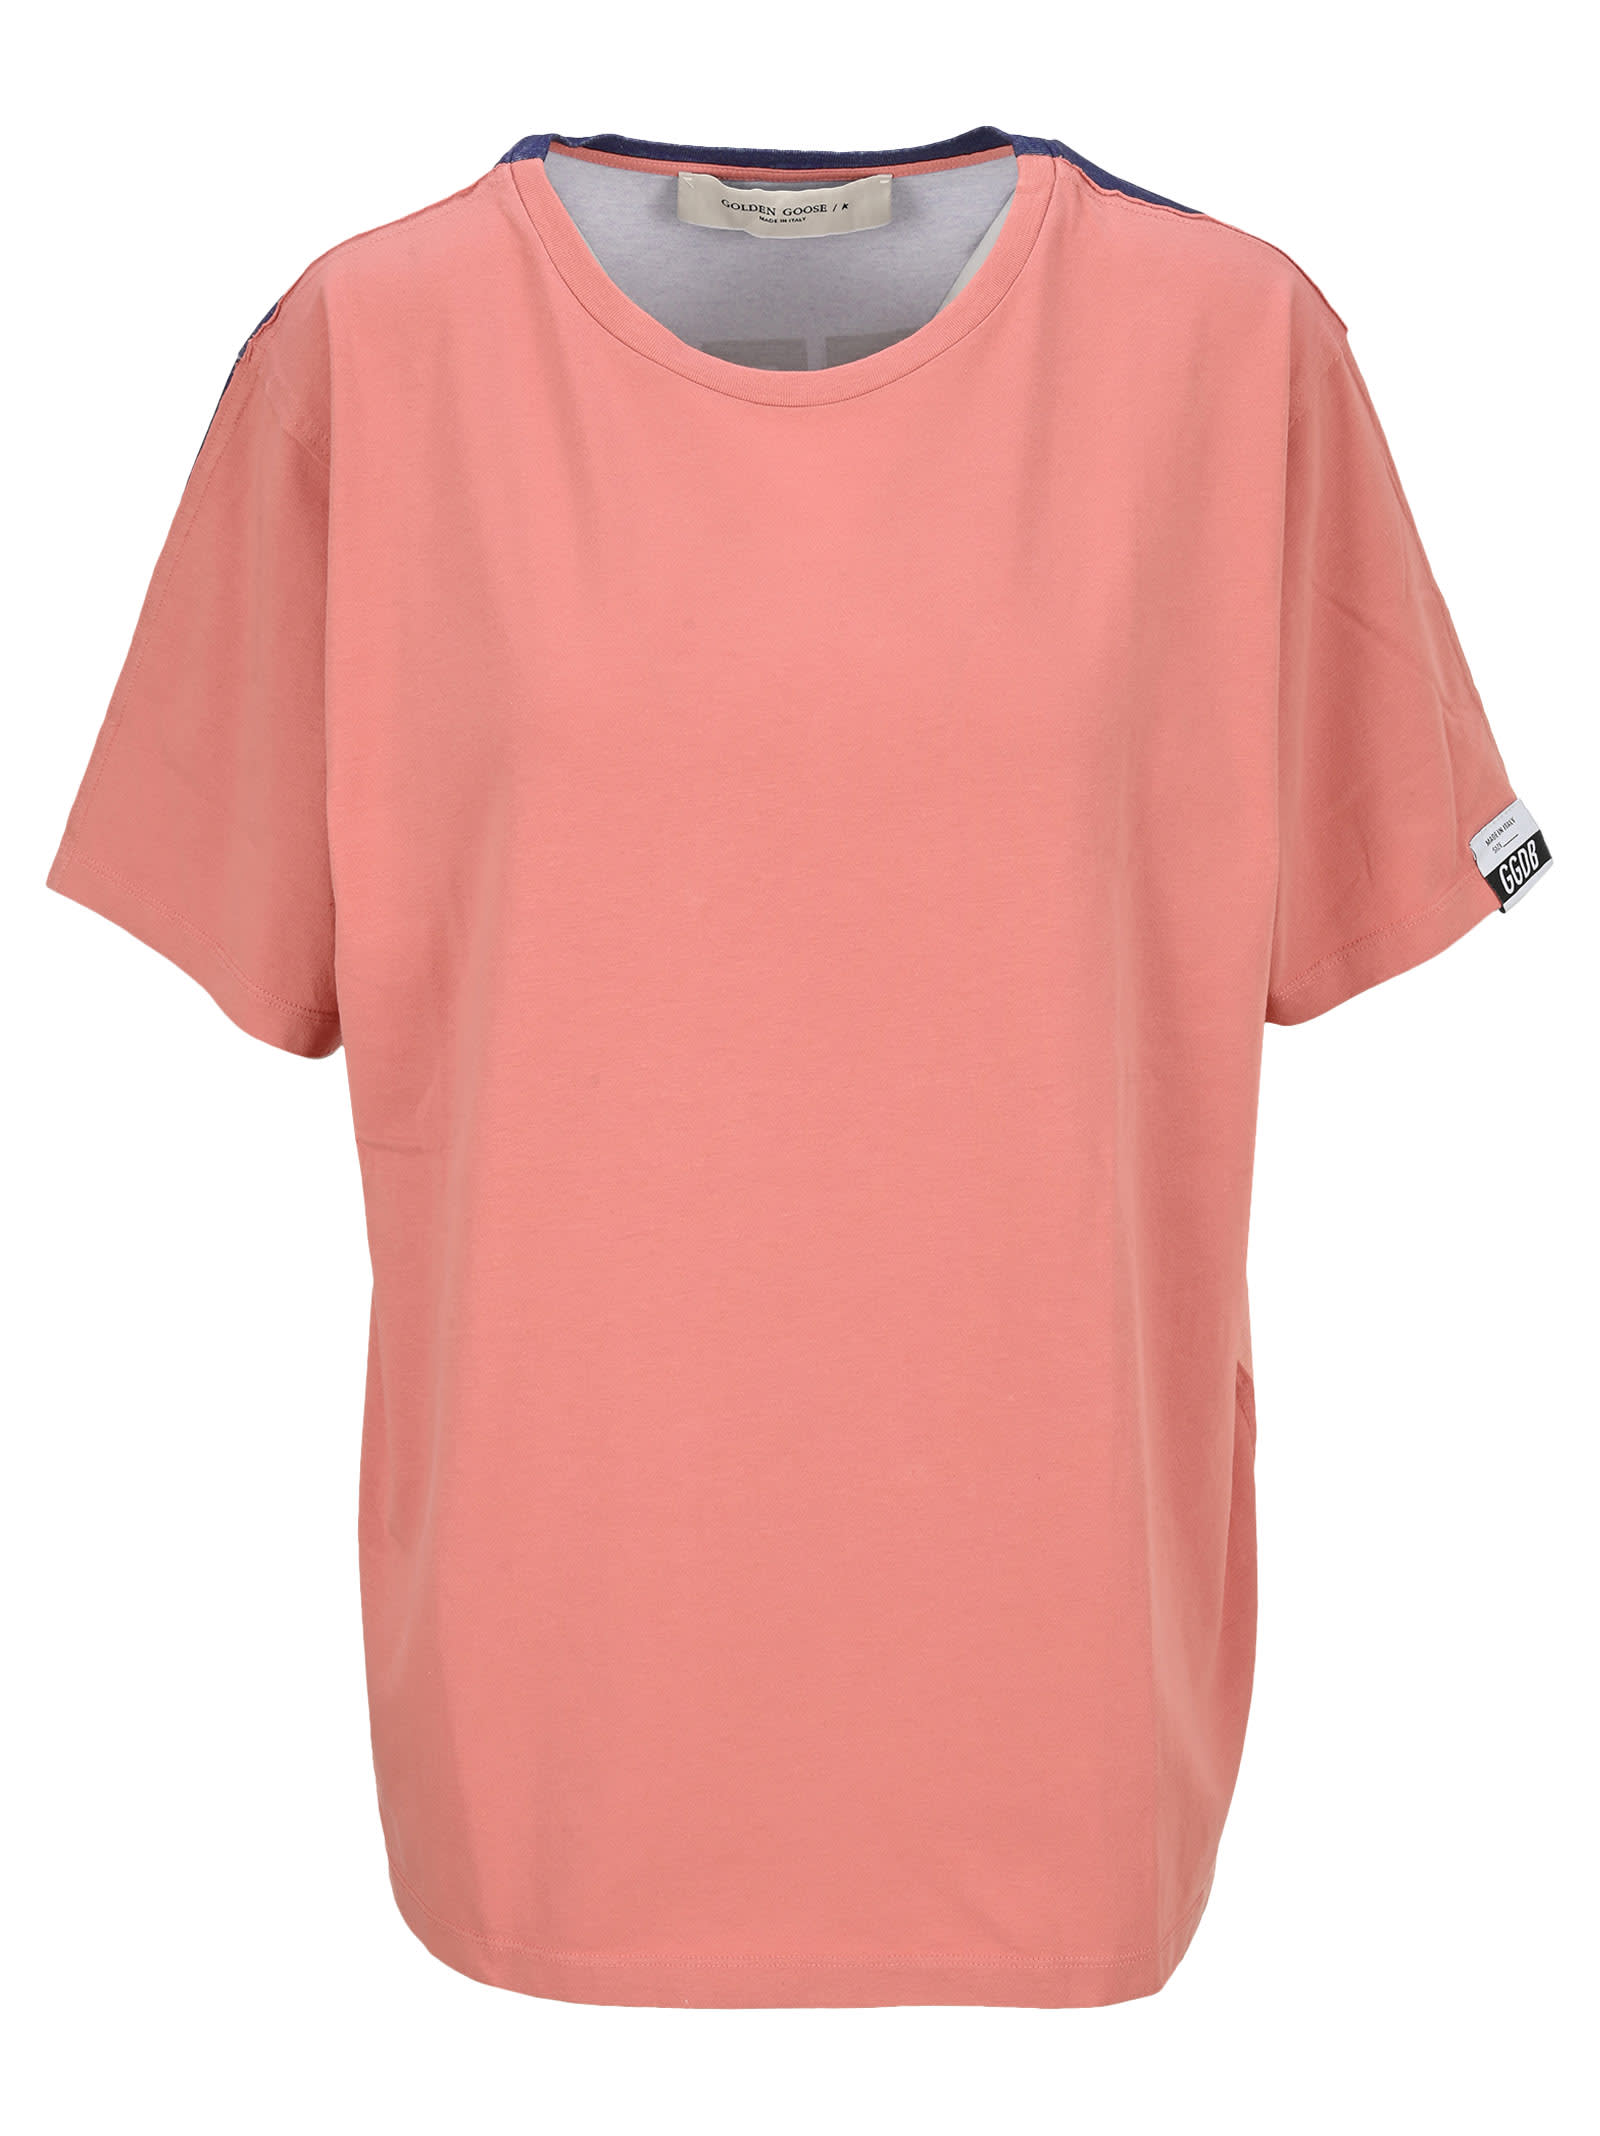 Golden Goose Pink Aira T-shirt With Print And Lettering On The Back